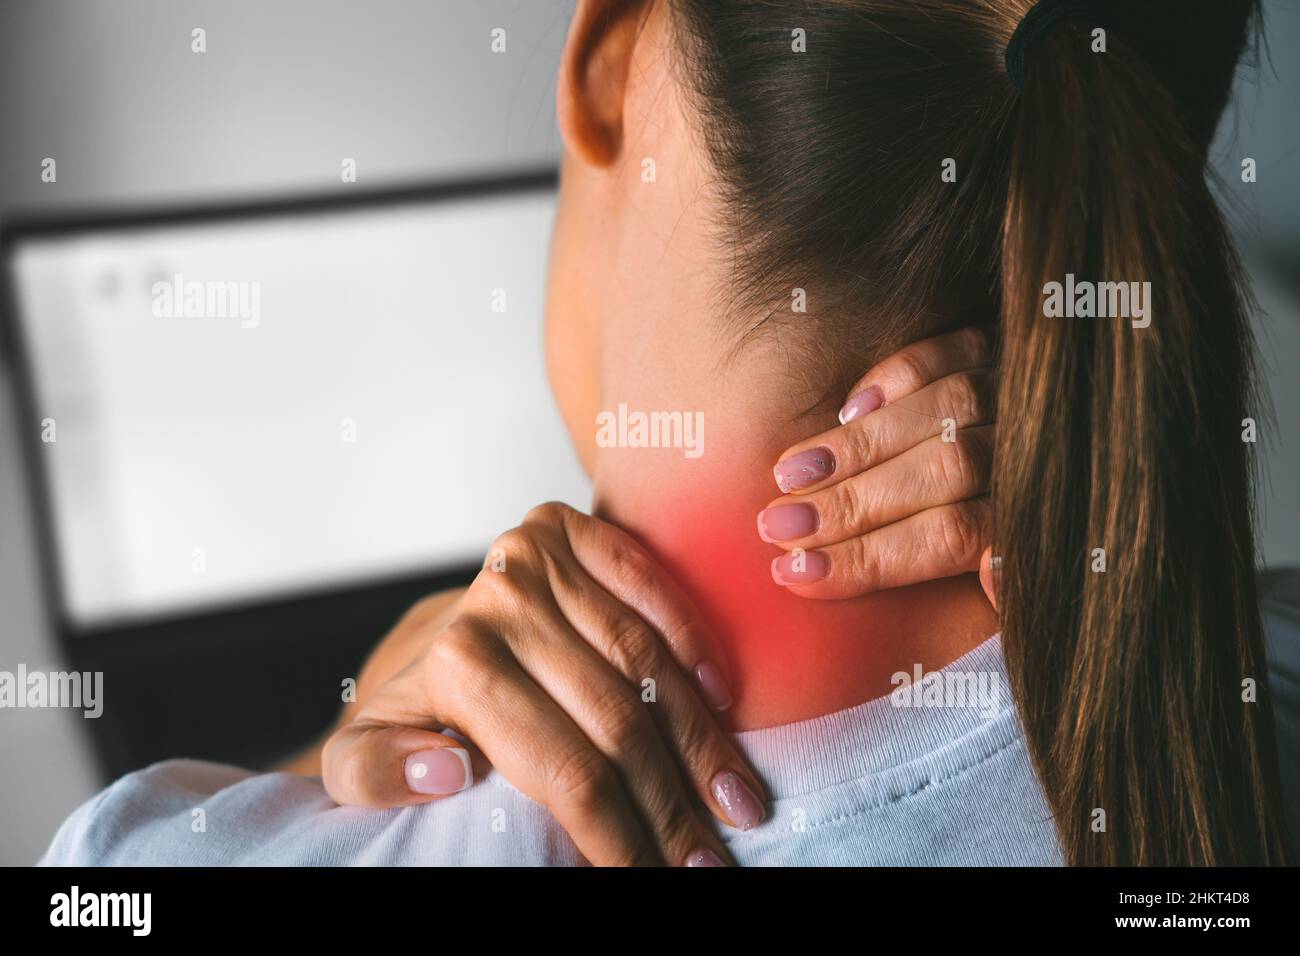 Neck pain after working on computer. Young woman massaging neck to relieve pain after working on pc Stock Photo